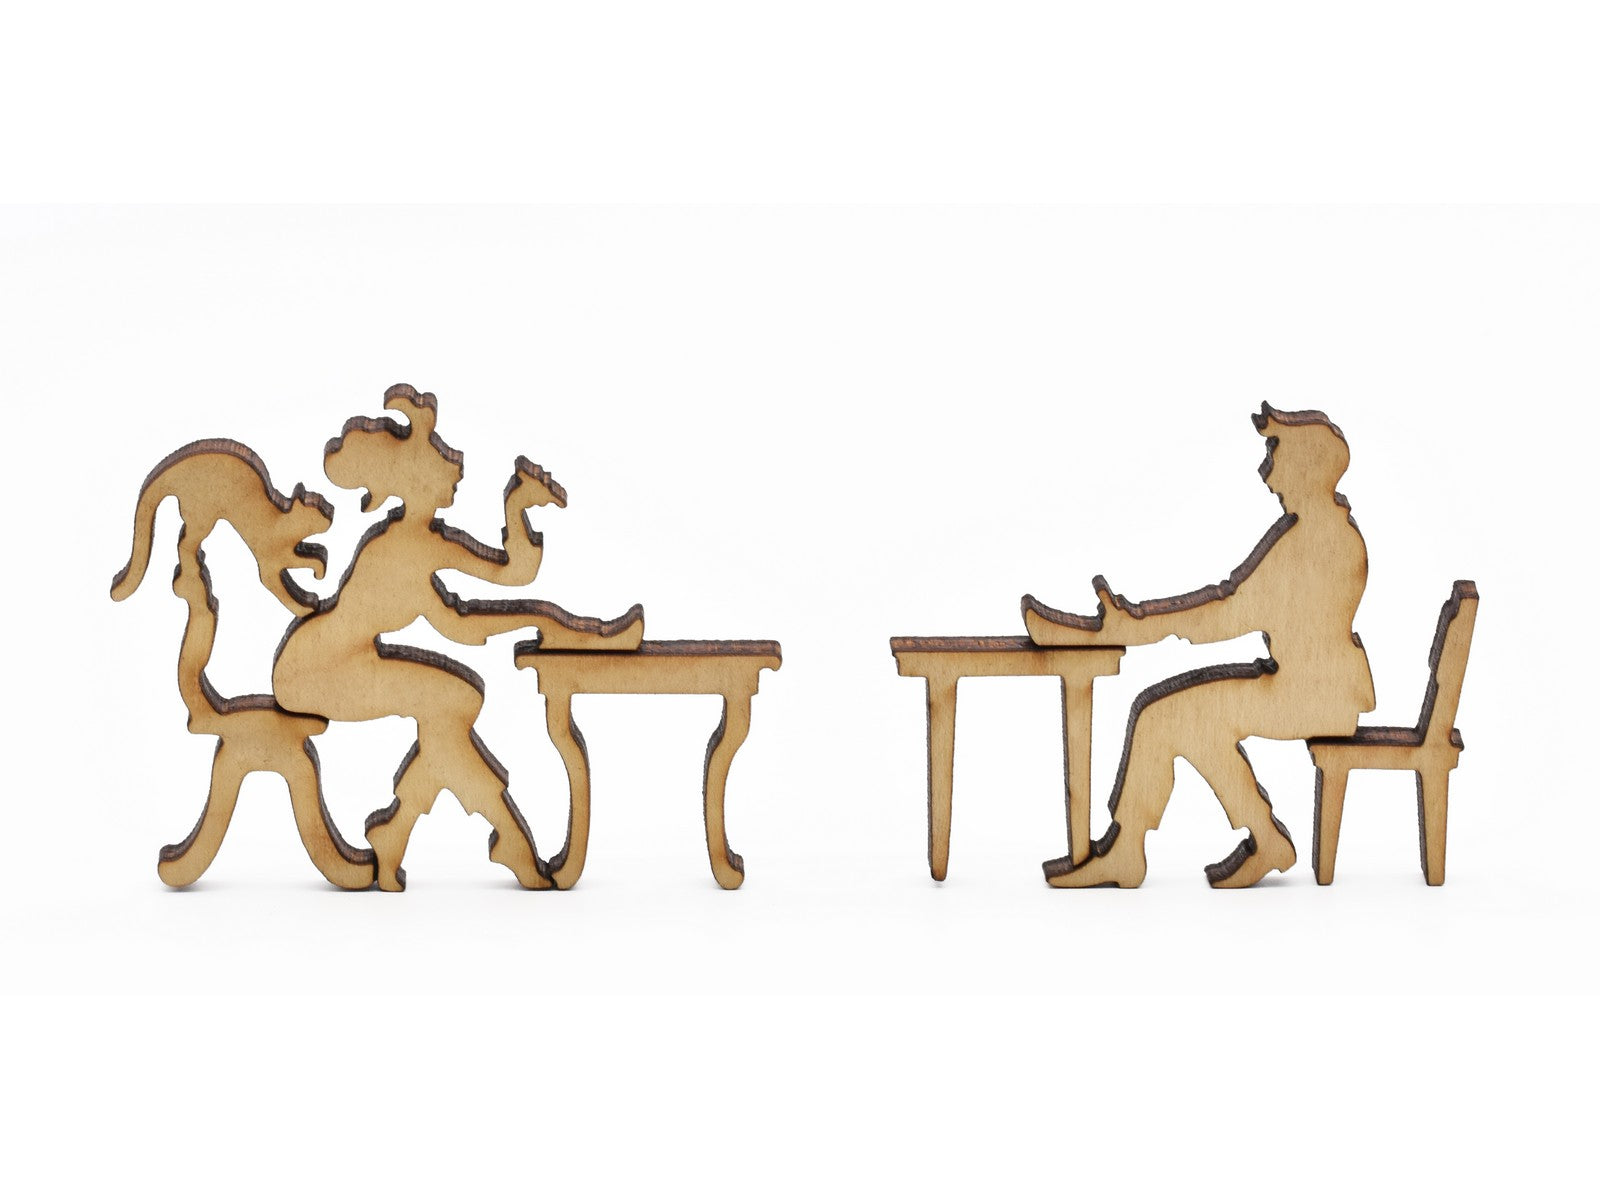 A closeup of pieces in the shape of two people at desks writing letters.